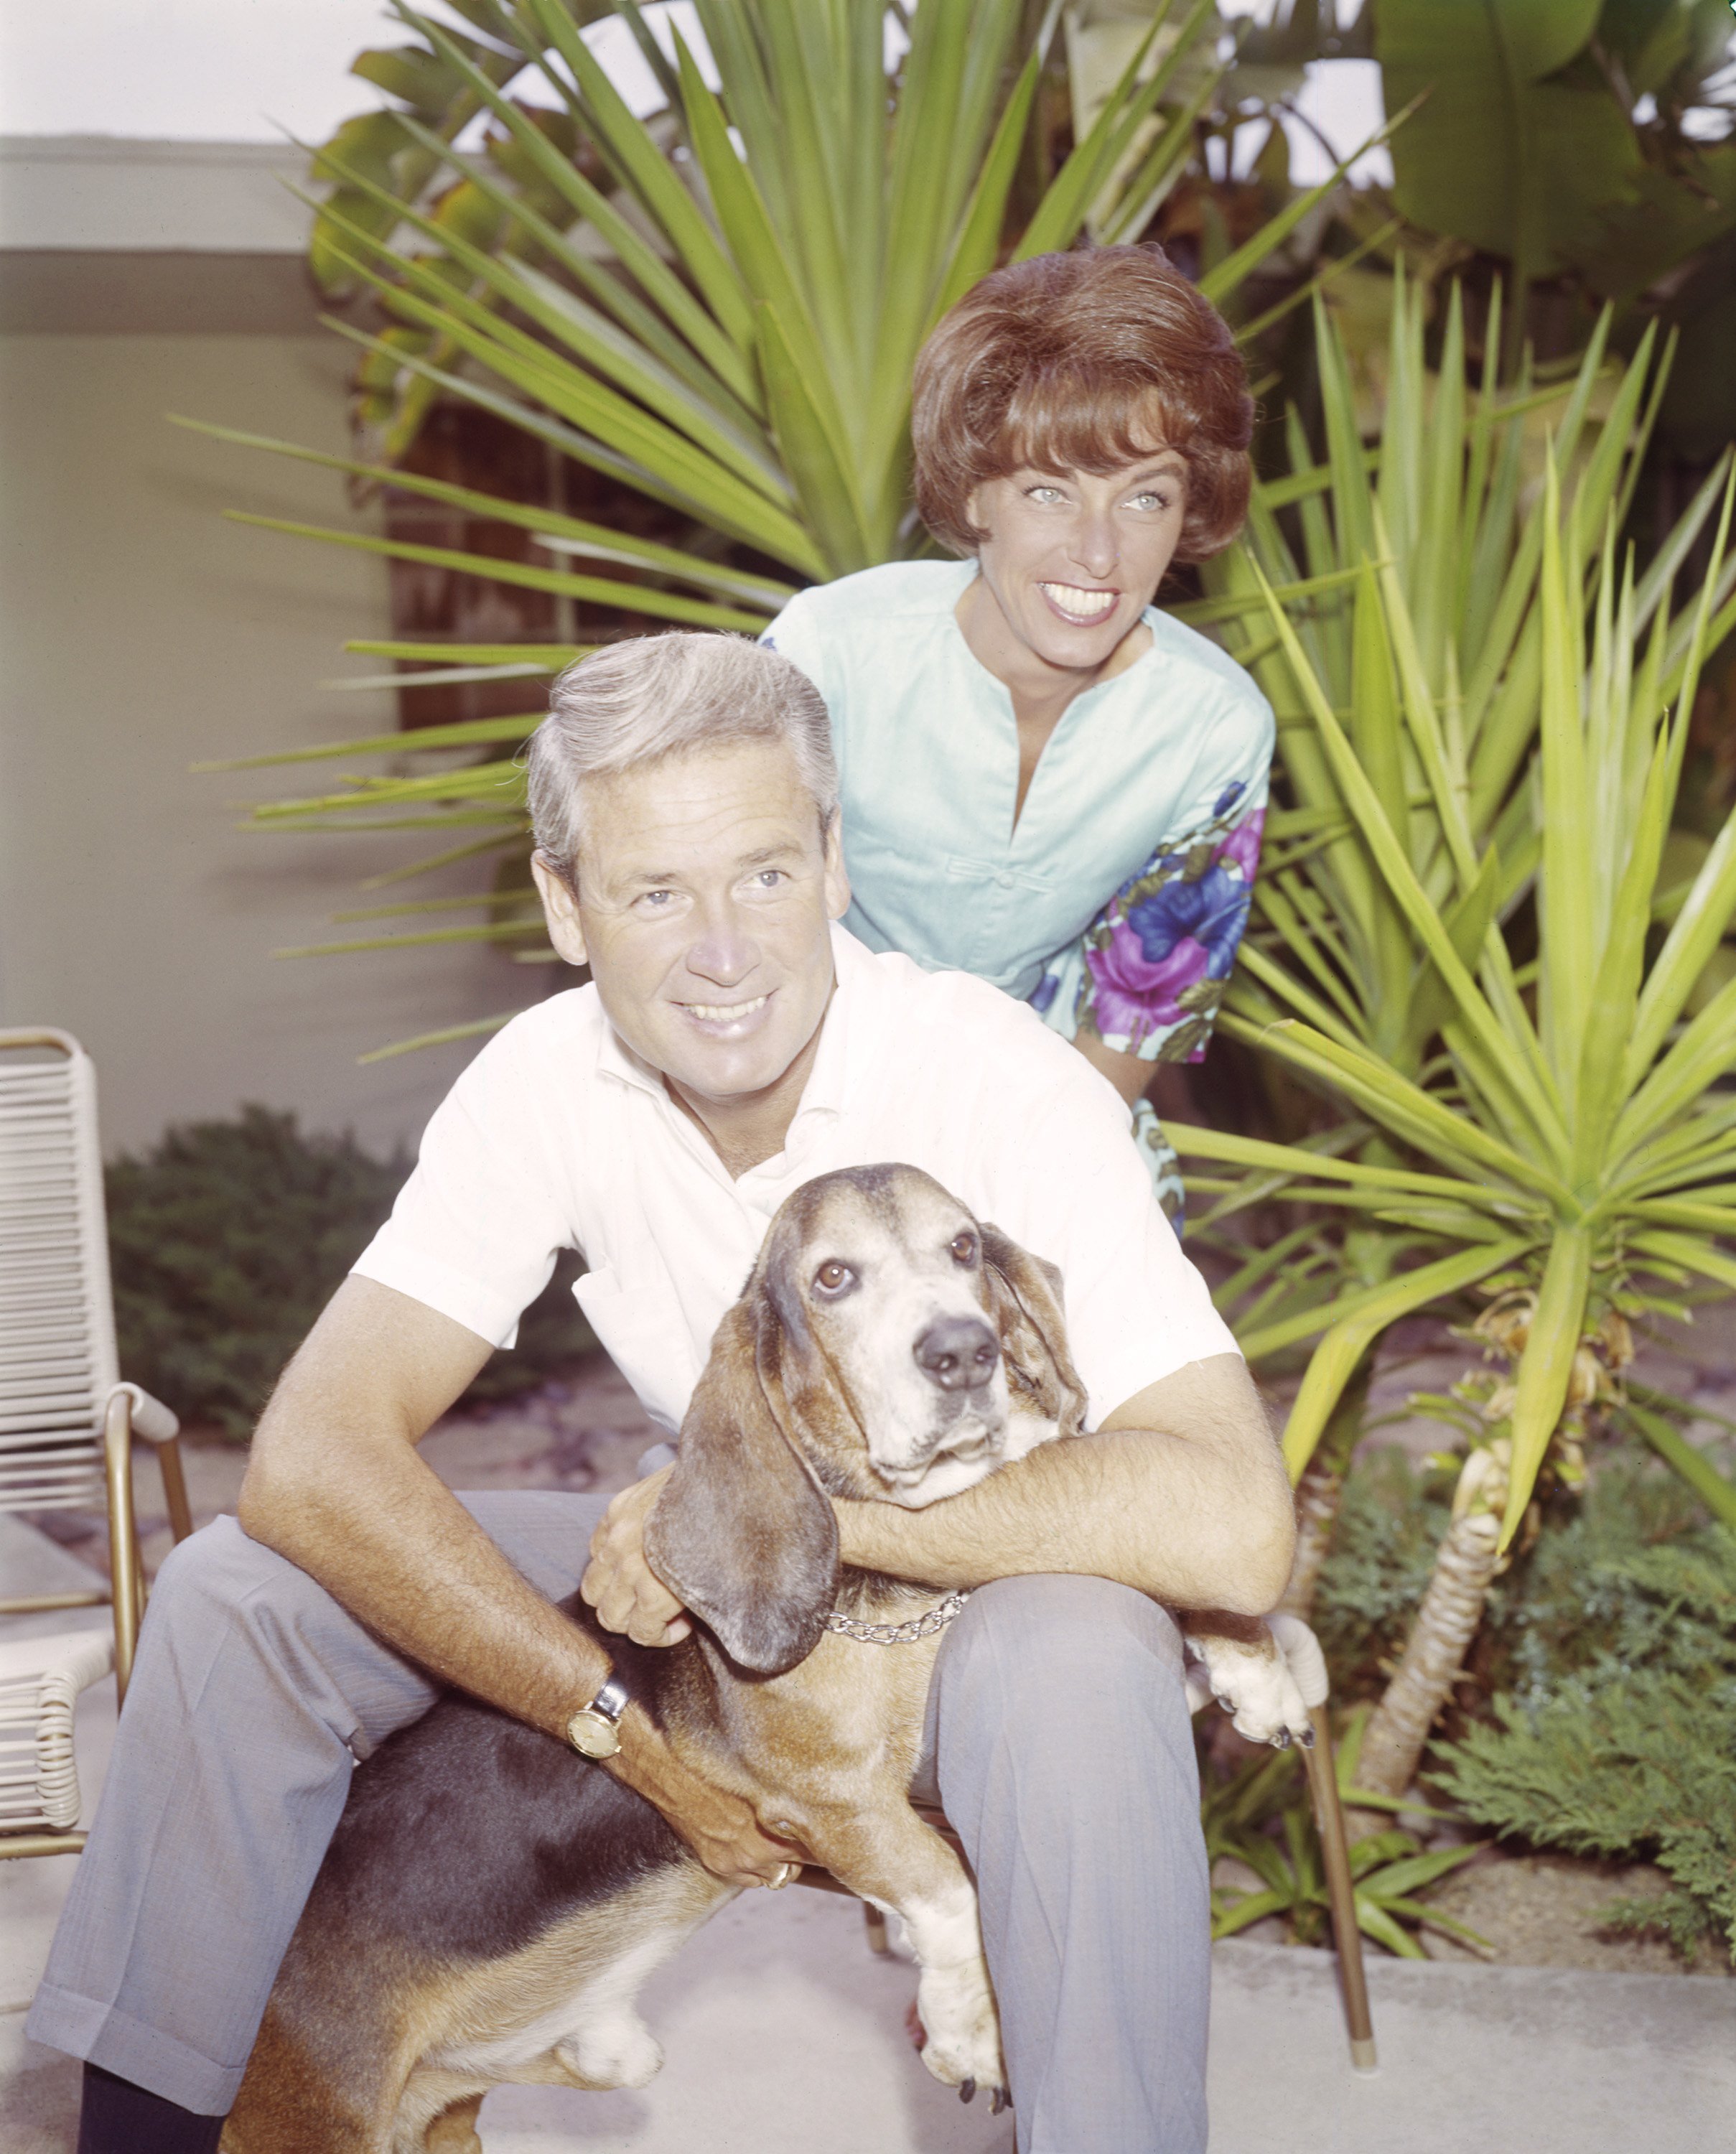 Bob Barker is pictured with his wife Dorothy Jo Barker and their dog. | Source: Getty Images